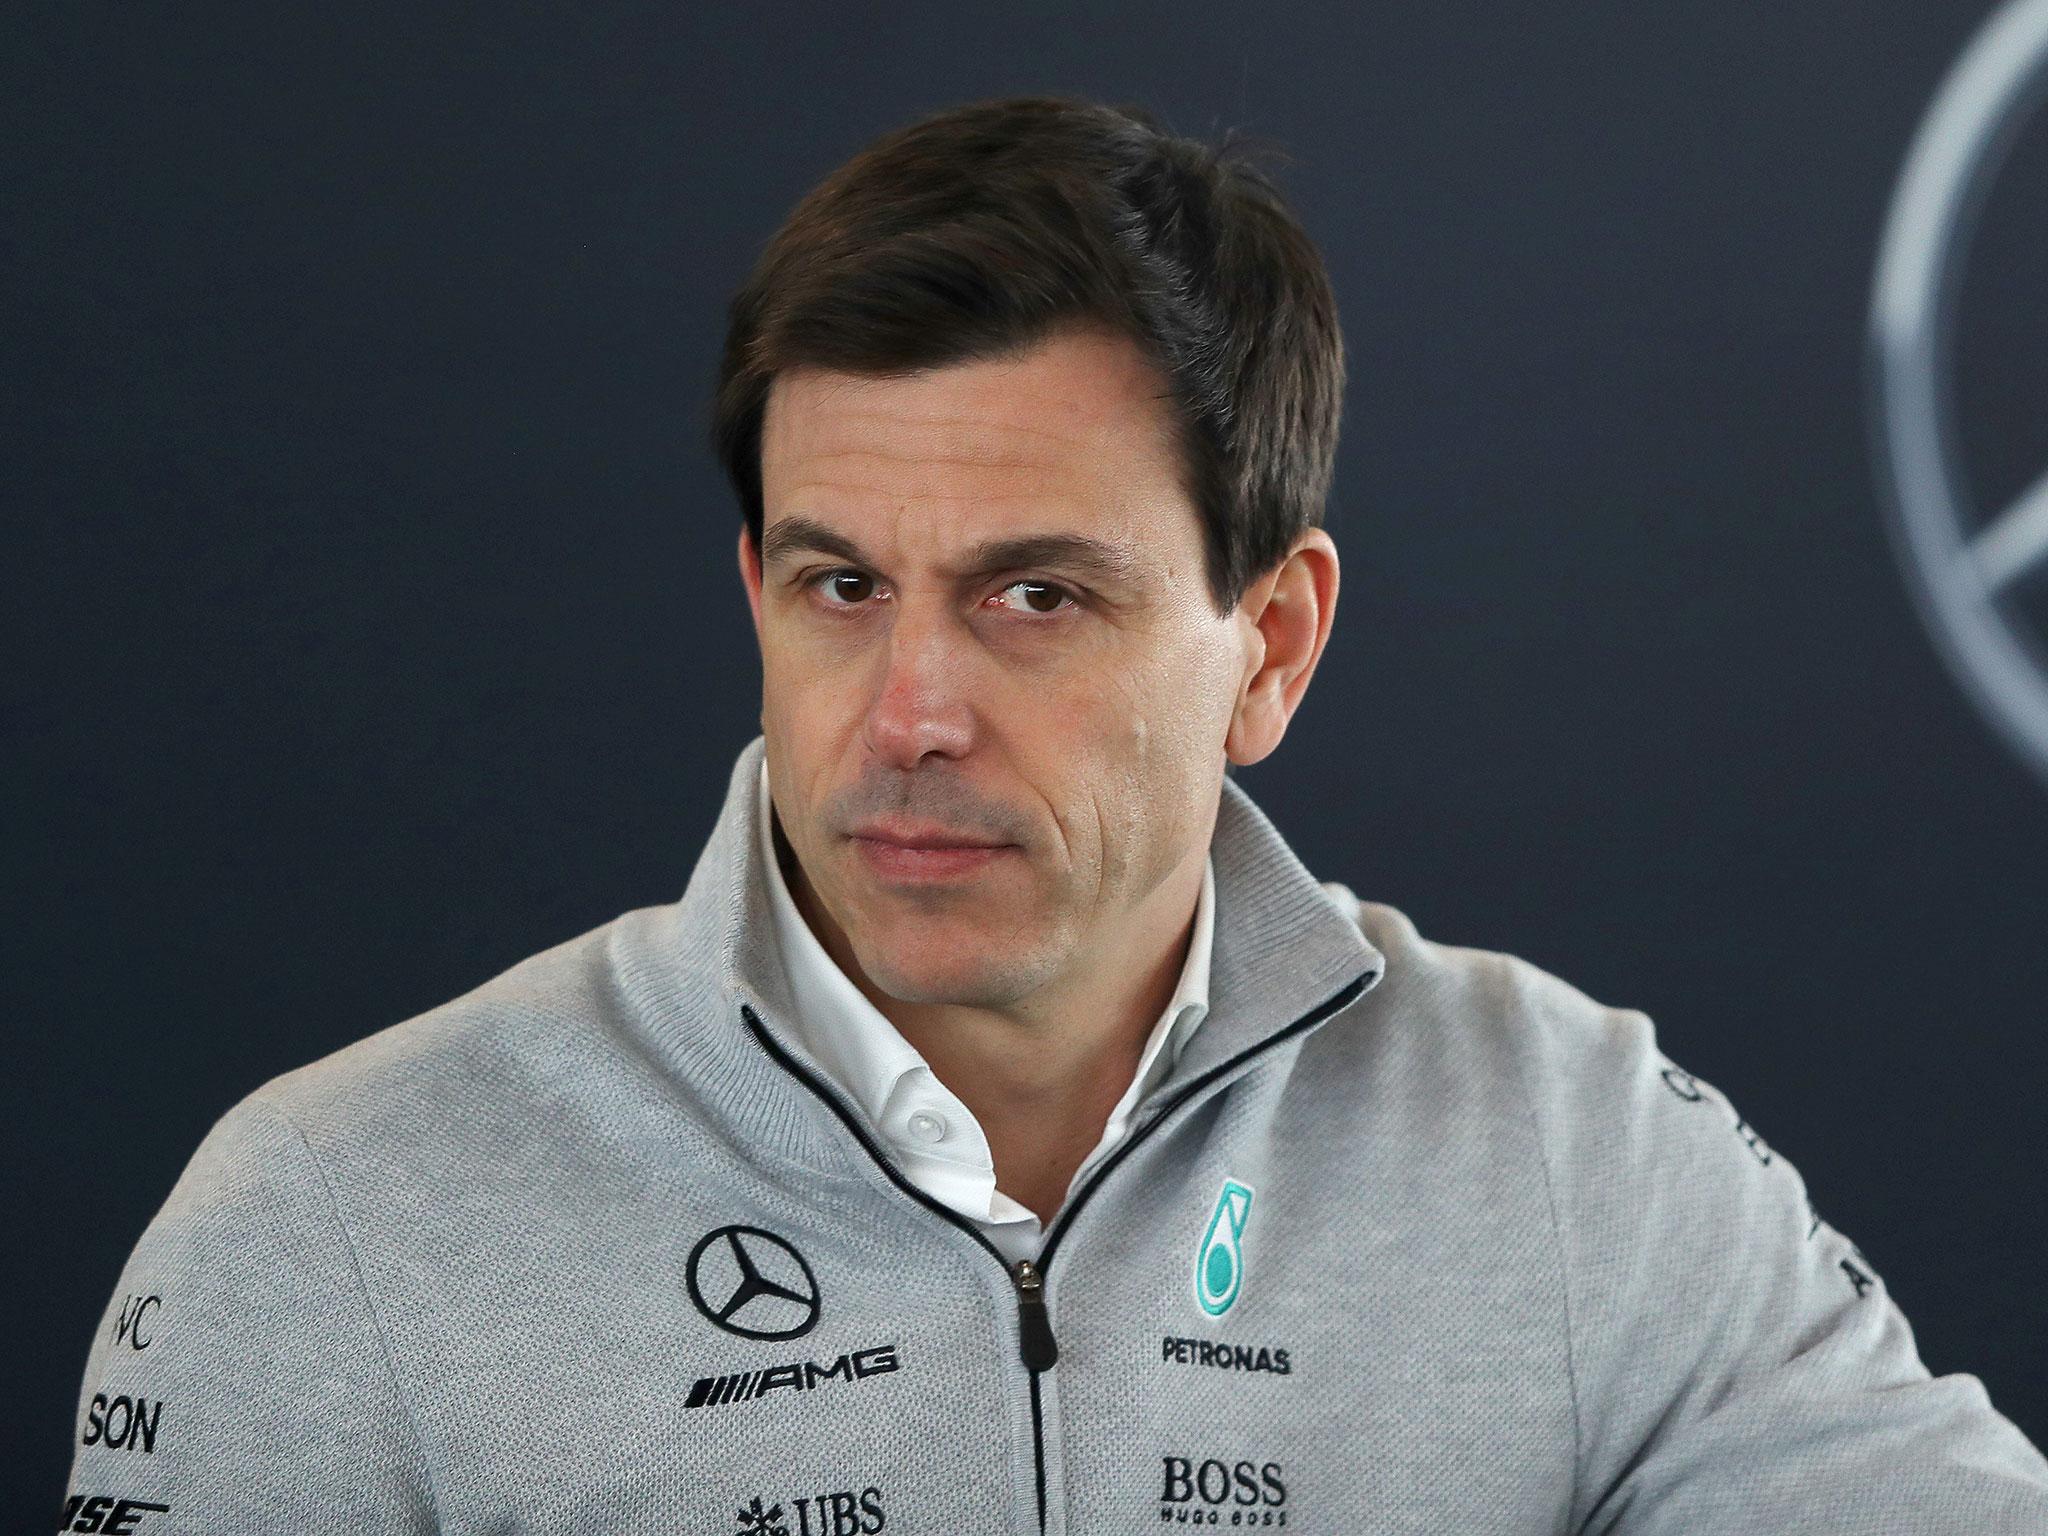 Toto Wolff has dismissed any claims of illegality surrounding the Mercedes engine